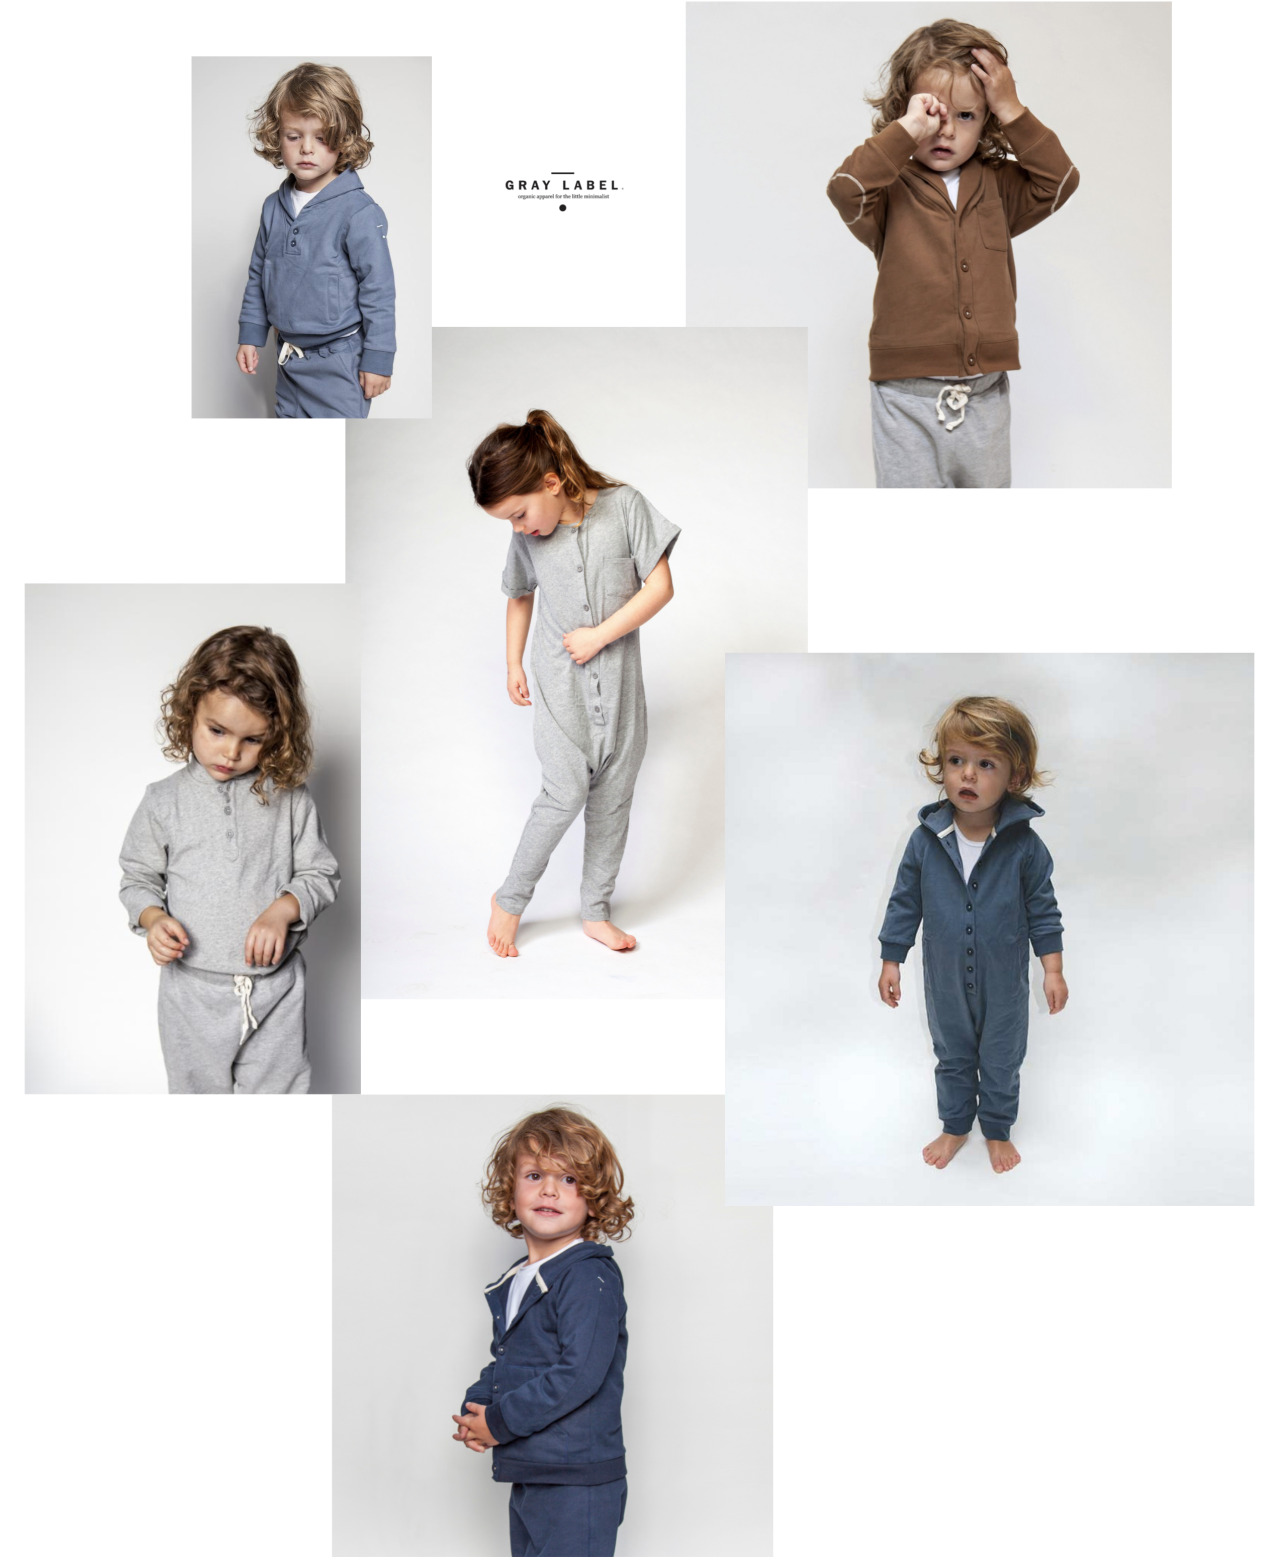 It&#8217;s like honey to a bee, this dutch label and its effortless, basic collection. 
Gray label clearly appreciates many of the same things as we do at Kidproof. Quality basics, soft fabrics, easy to wear styles in toned town shades. 
Can&#8217;t wait to receive our first tryouts soon! 